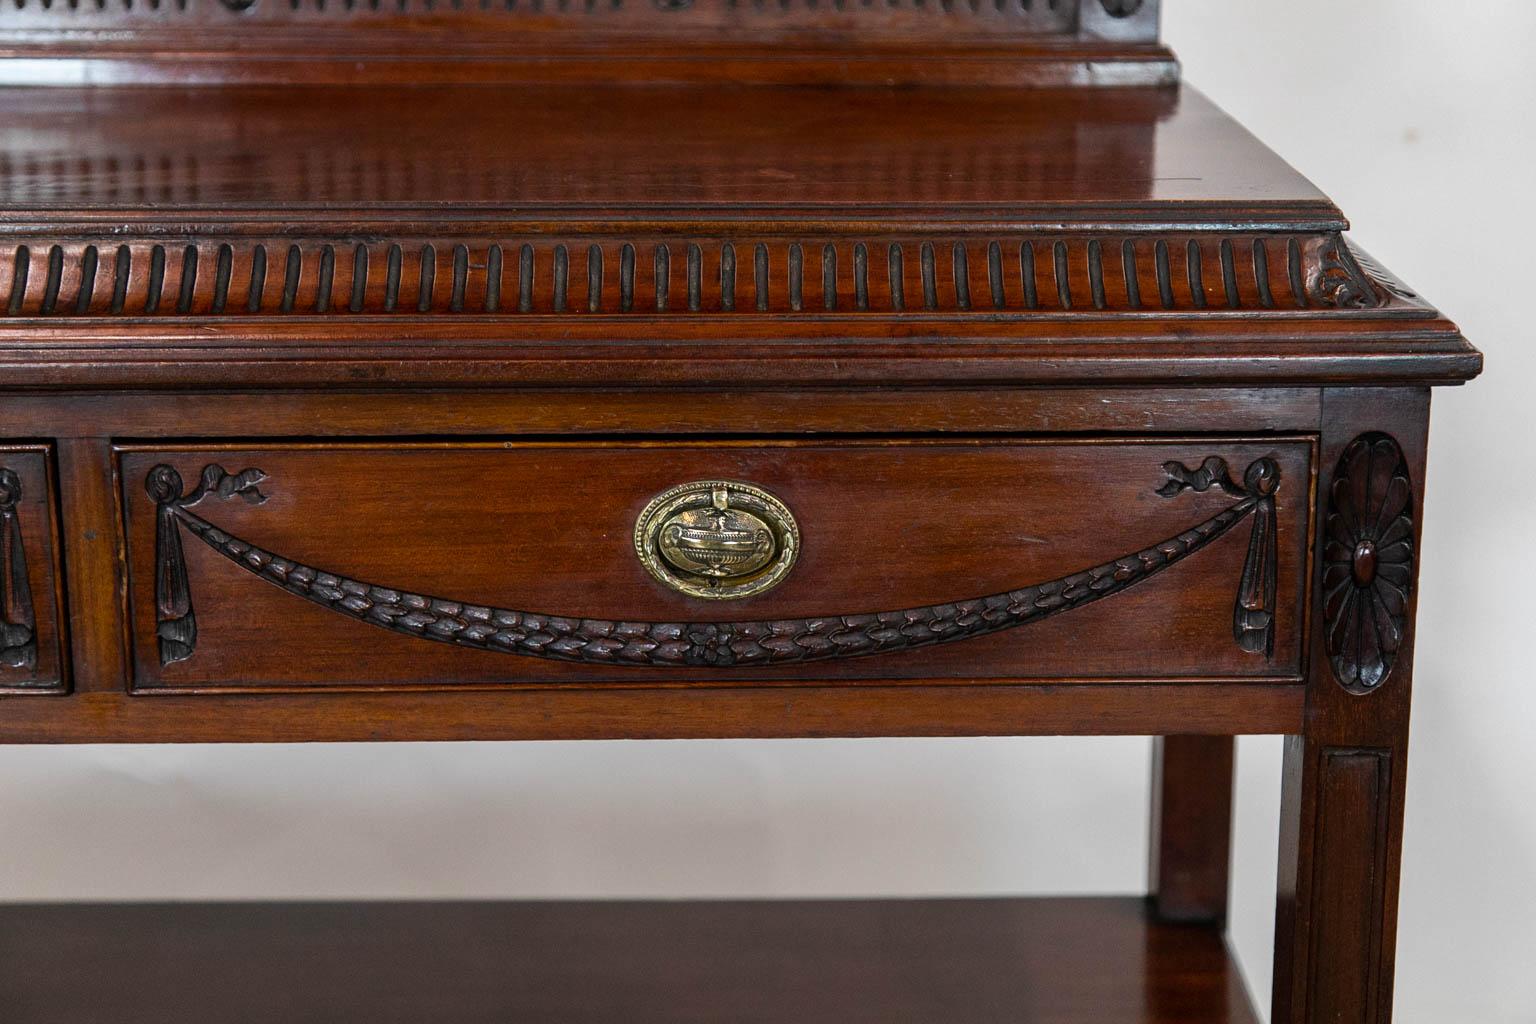 This mahogany two tiered server has a tall fluted gallery with five carved oval panels. The top has a concave fluted frieze with carvings on the corners. The two drawers have carved stylized bellflower swags. The brasses have raised classical urns.